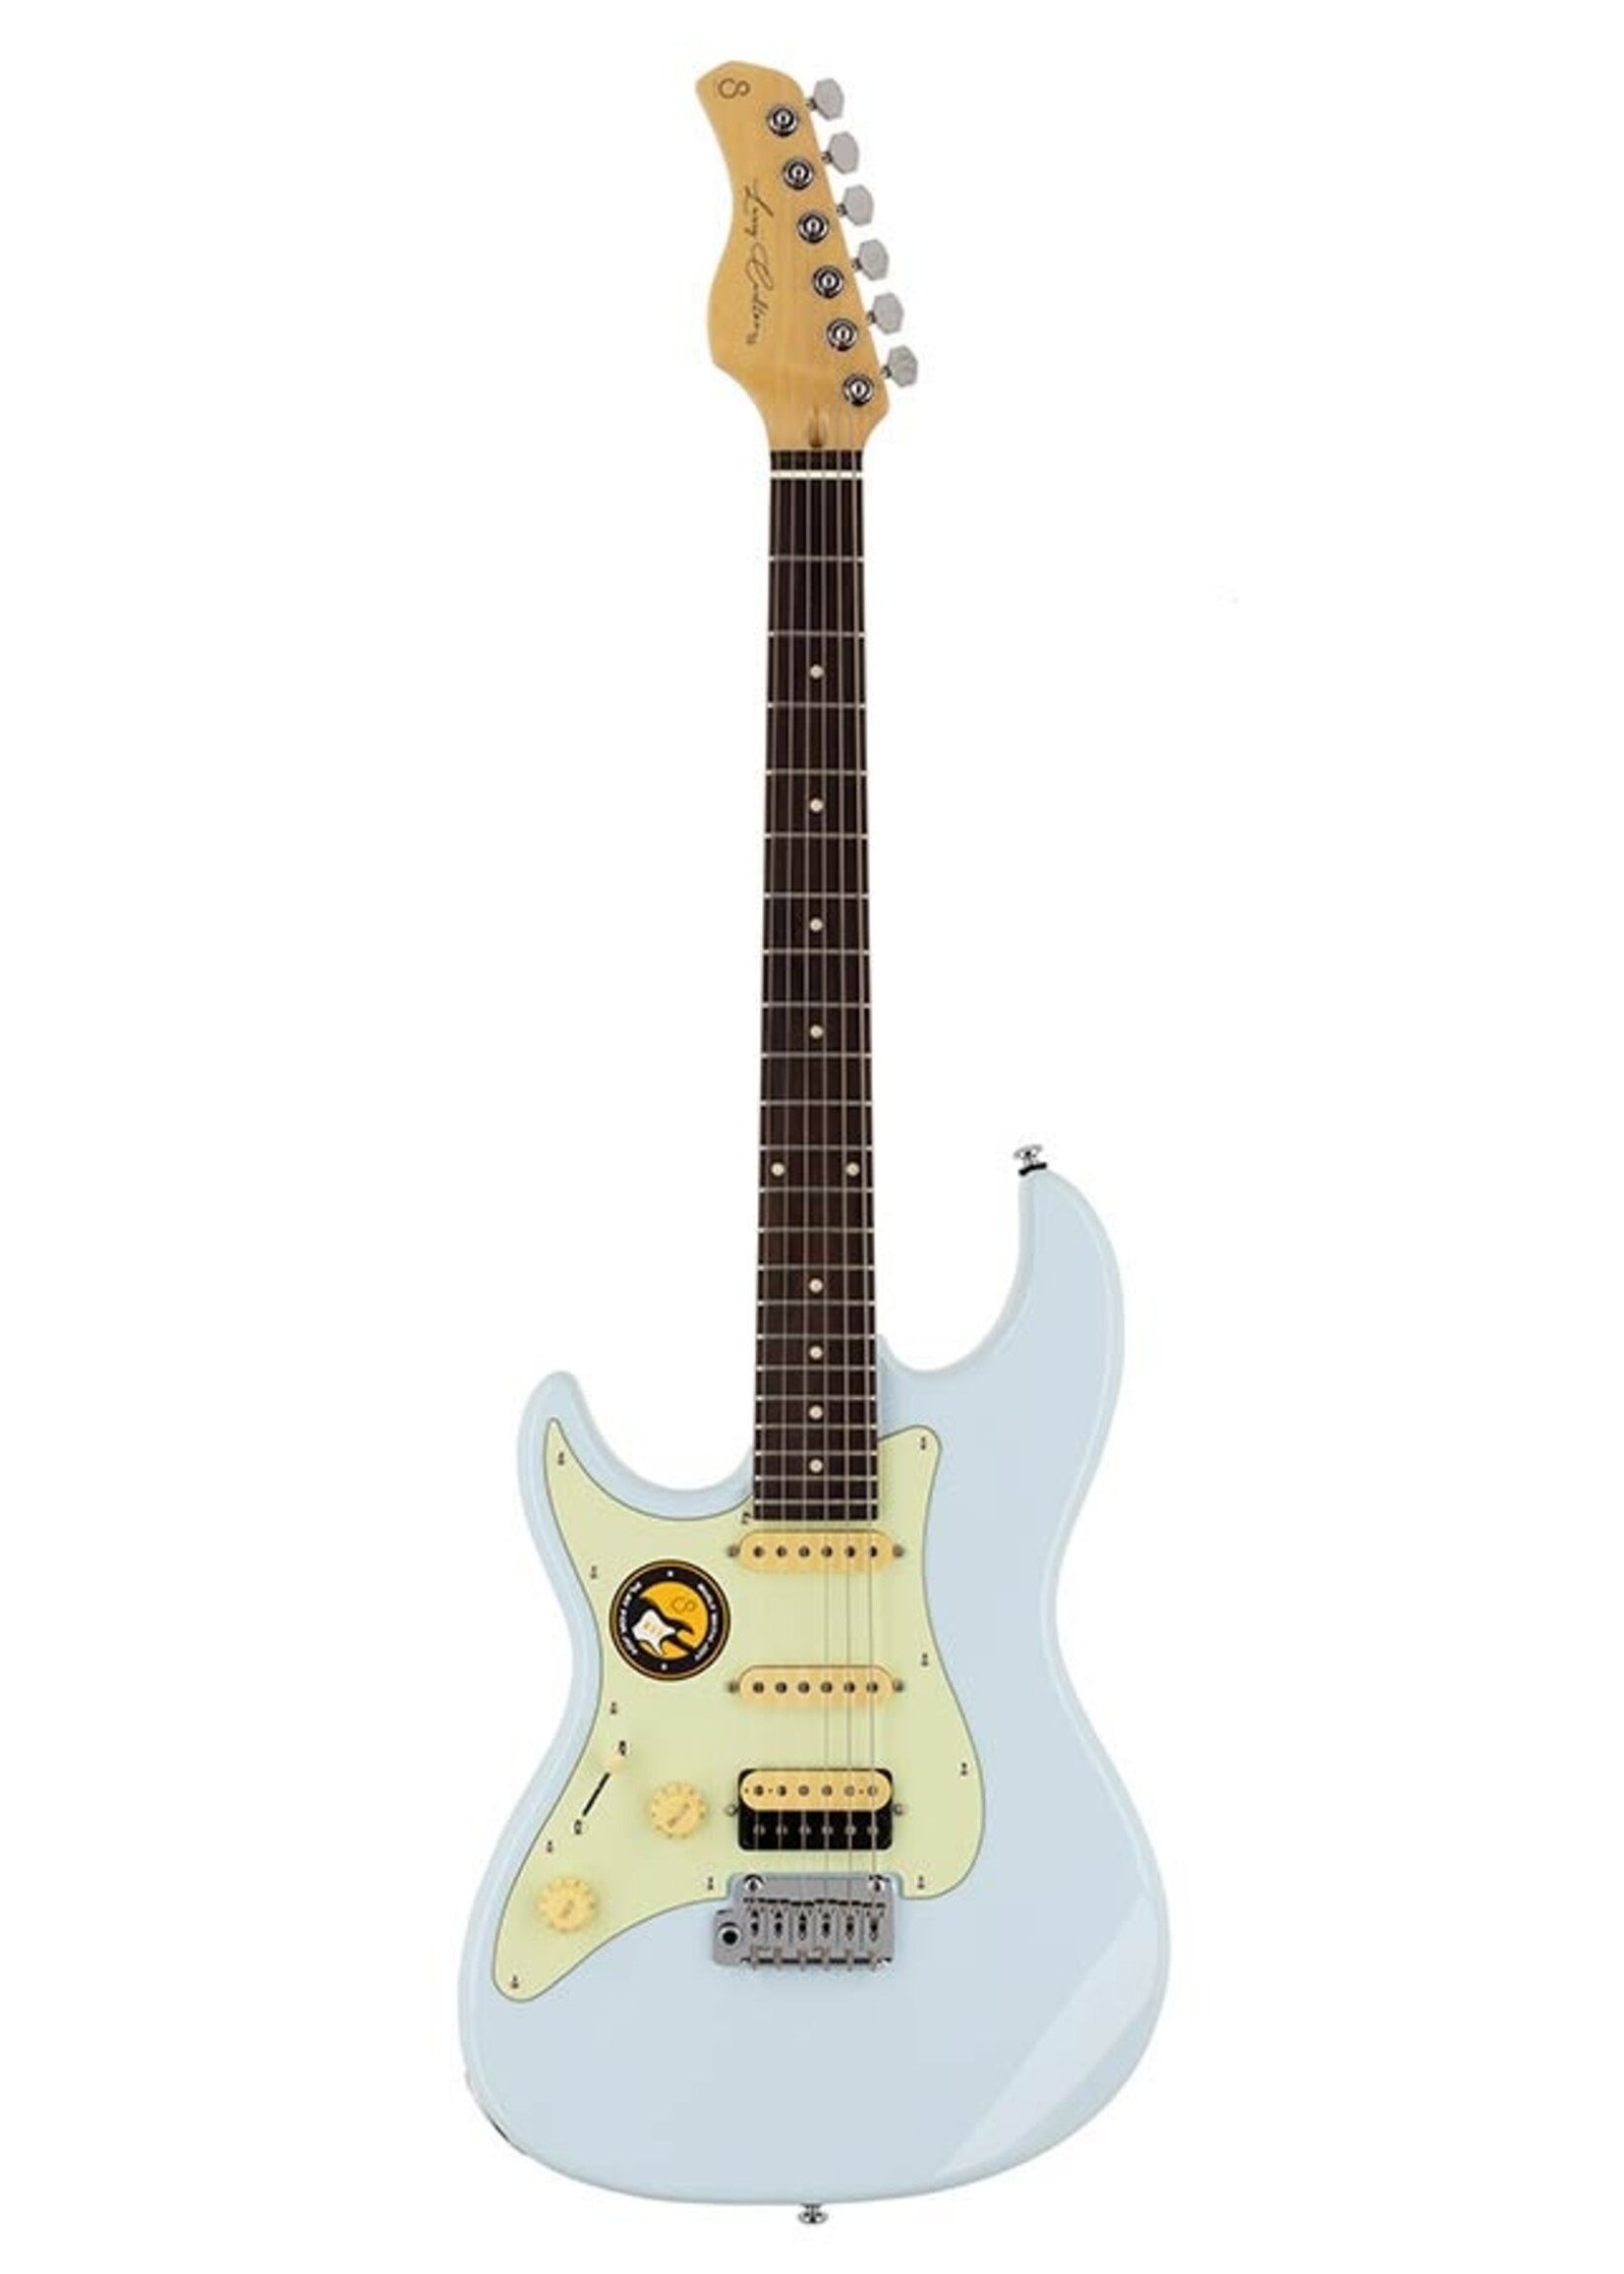 Sire Sire Guitars S3L/SNB  S3 Series Larry Carlton lefty electric guitar S-style sonic blue